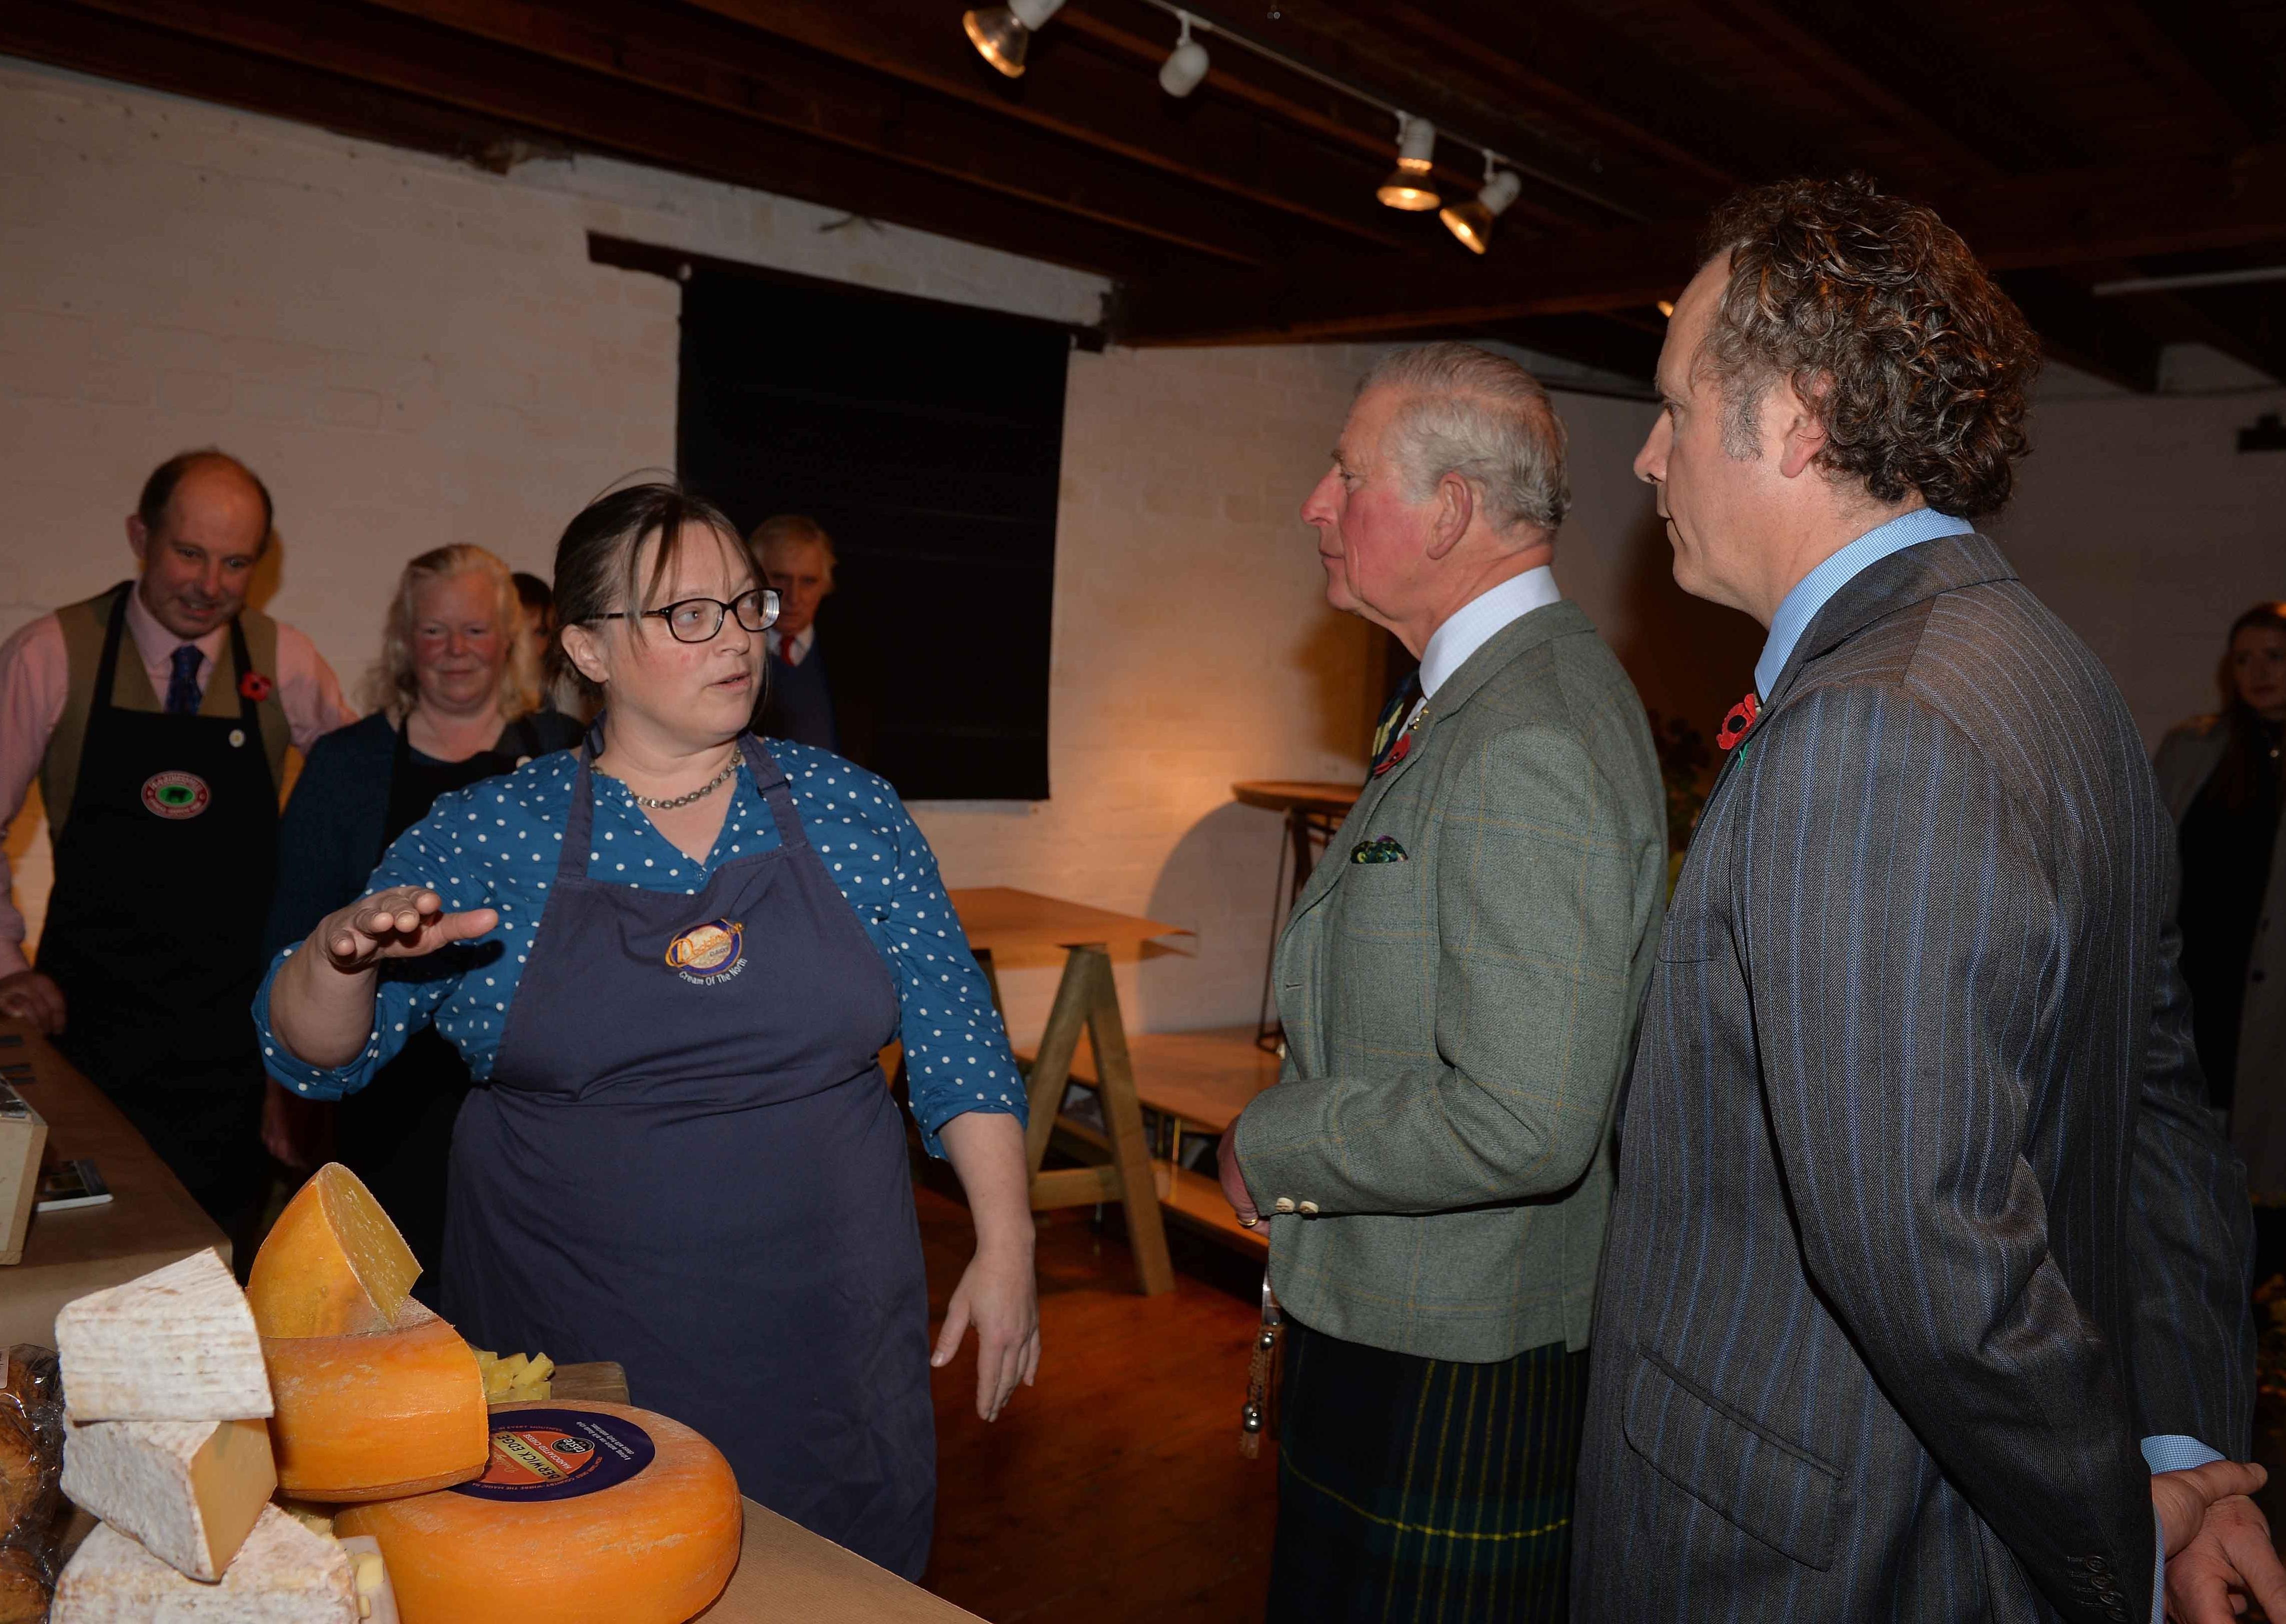 Maggie Maxwell from Doddington's Dairy talks with the Duke of Rothesay at Mainstreet Trading.